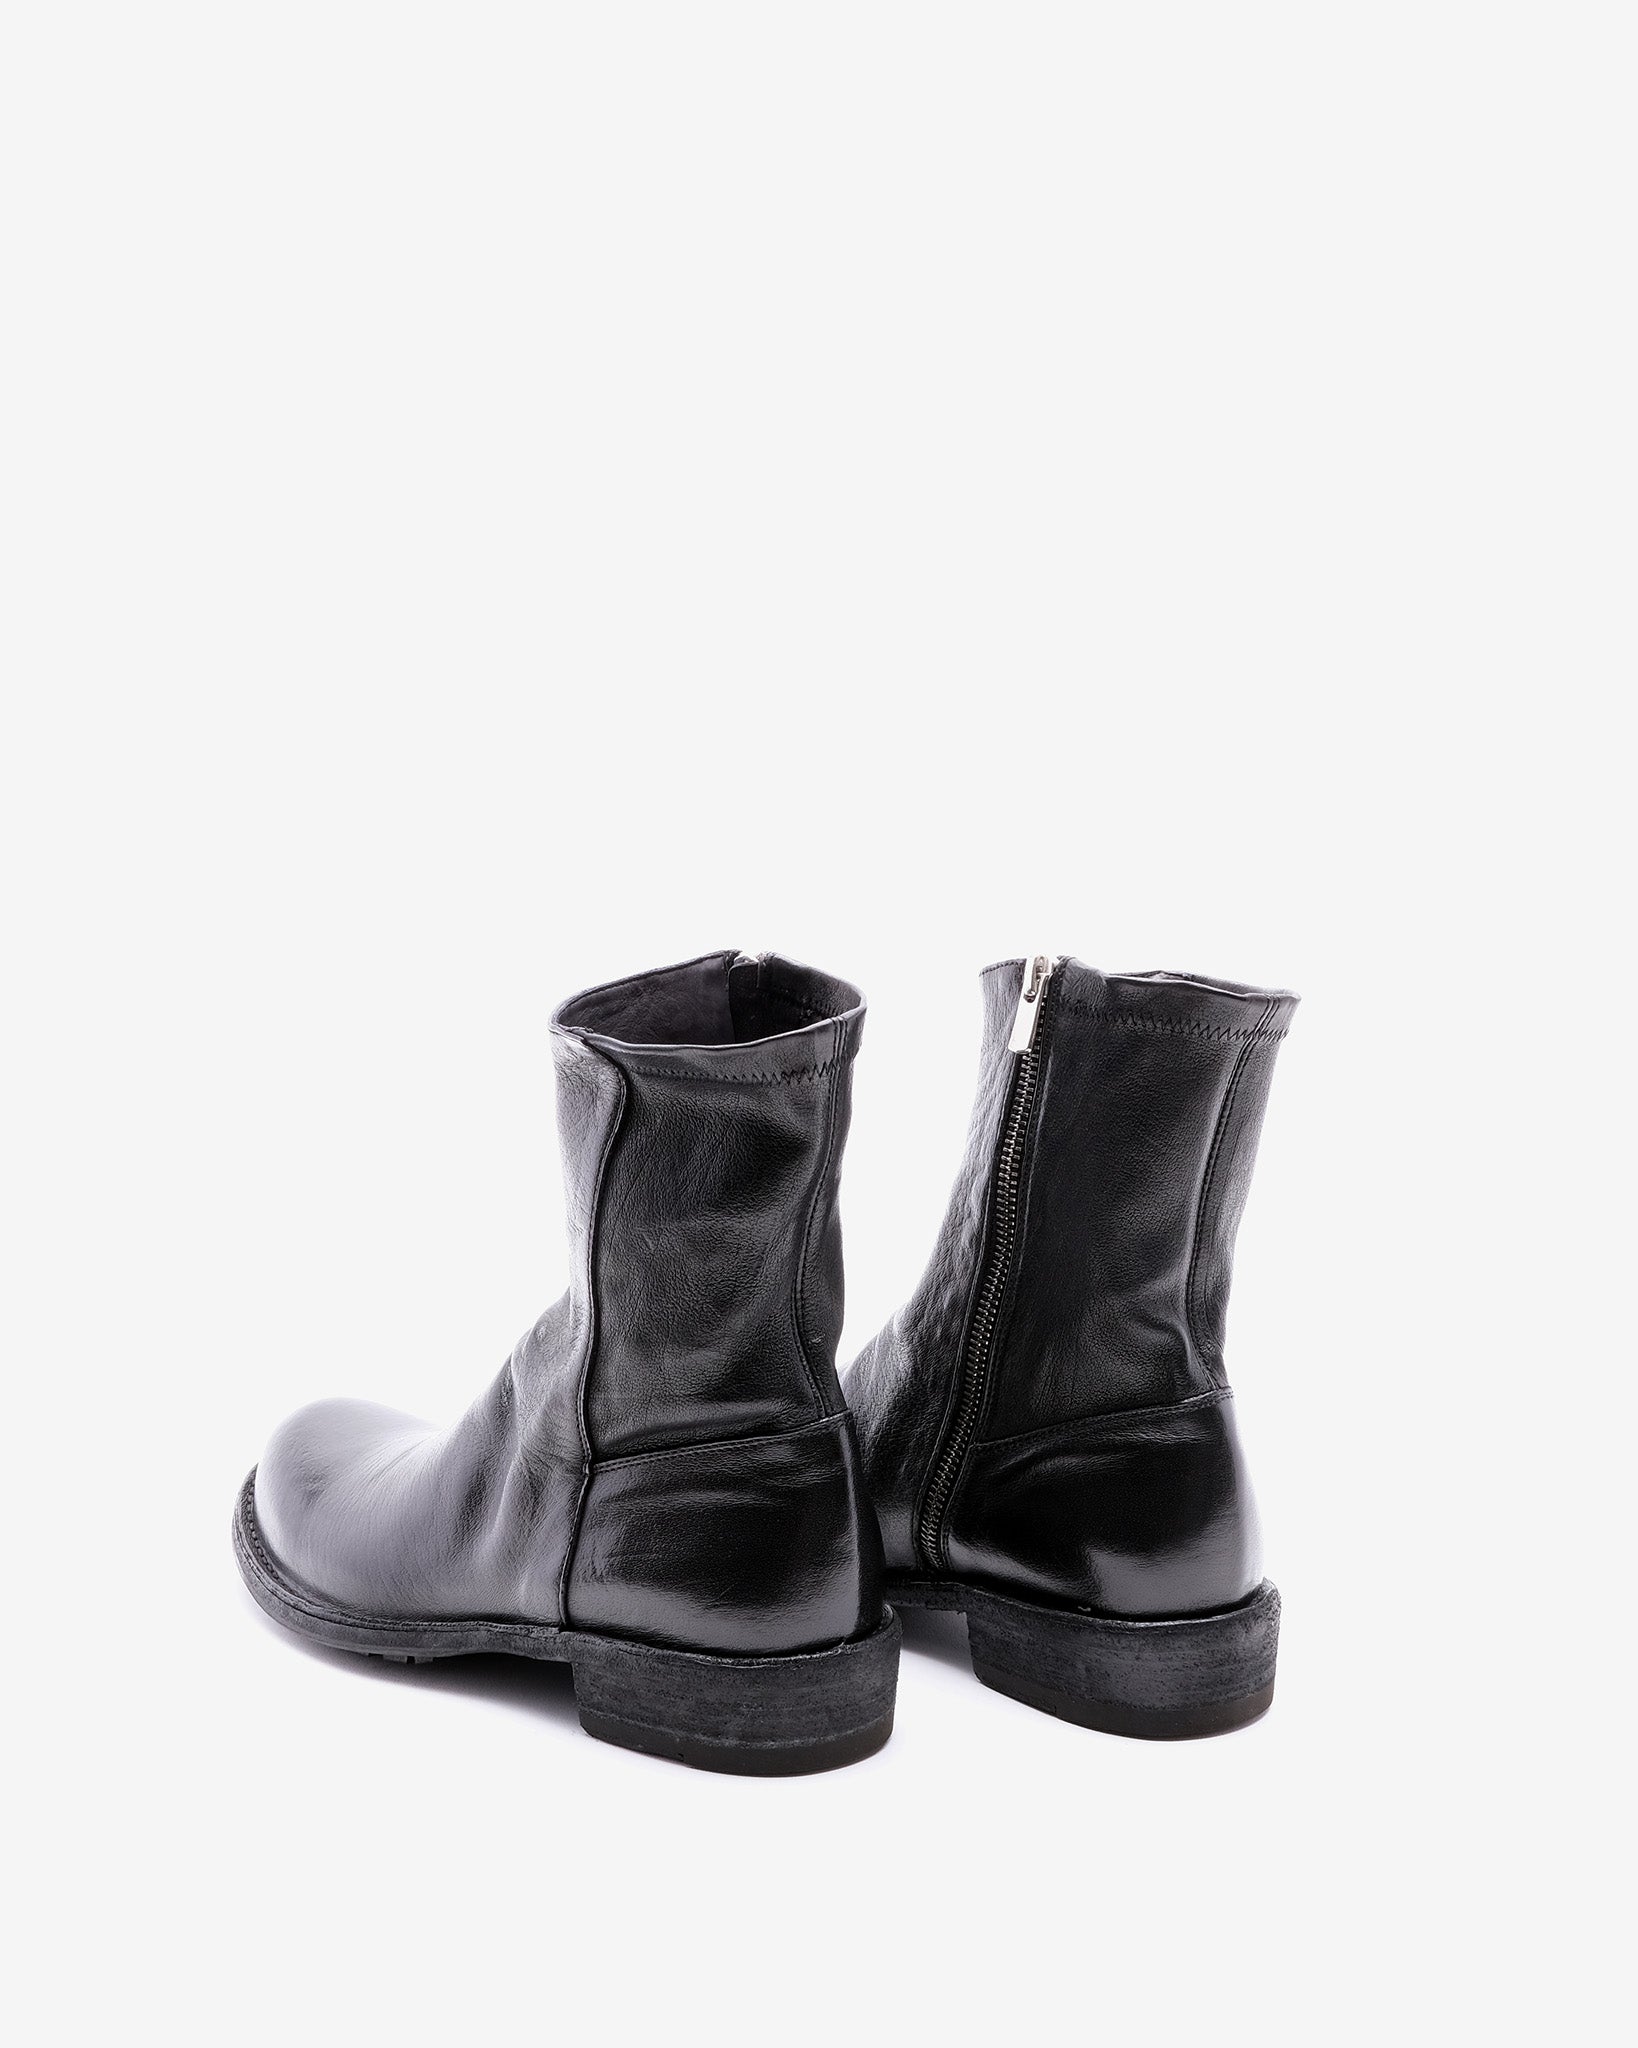 Legrand 203 Ignis Stretch T. Nero Leather Boots